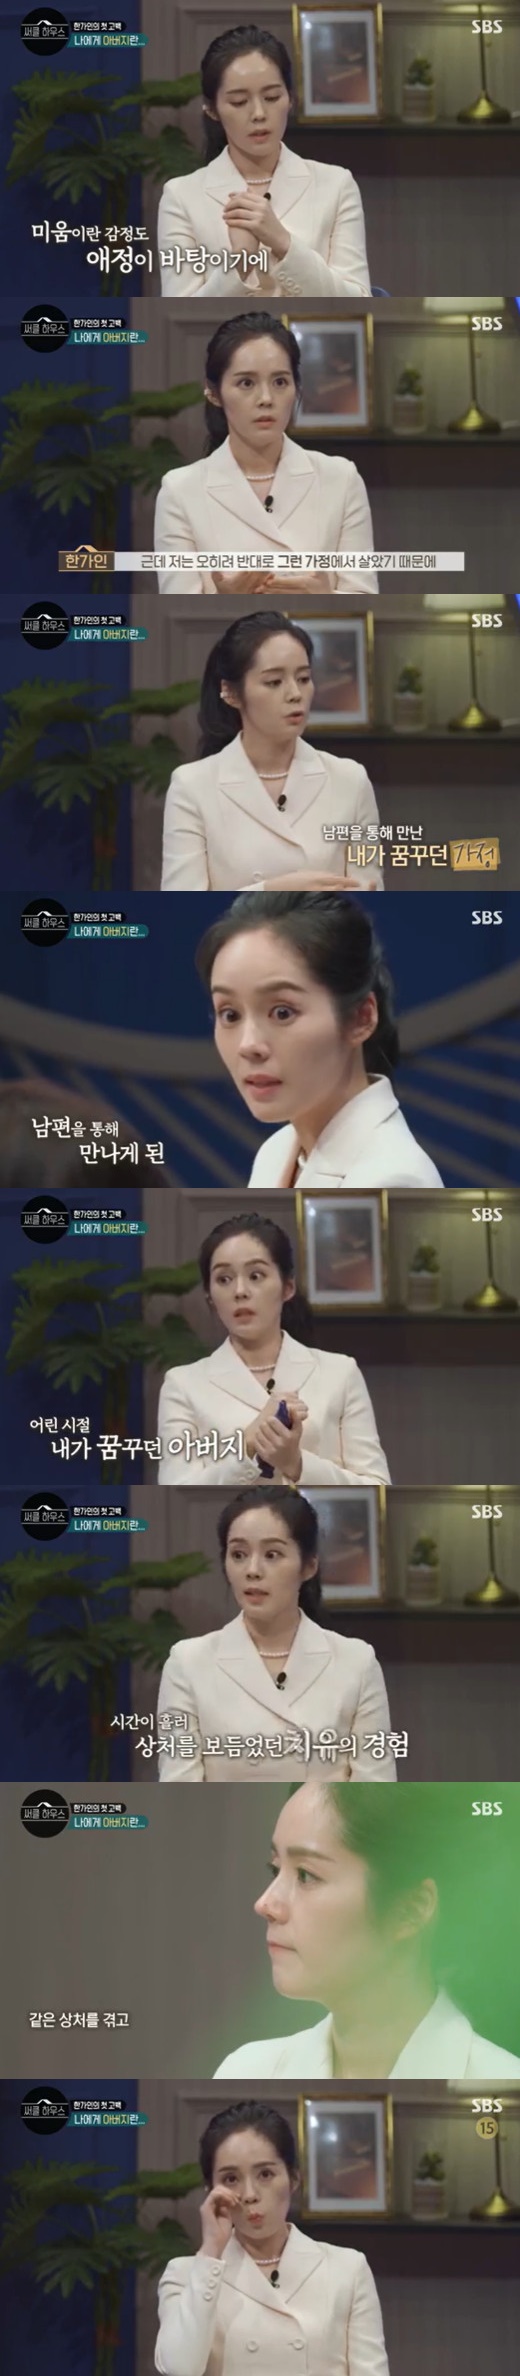 Actor Han Ga-in opens up a genuine story in circle houseIn the first SBS circle house broadcast on the afternoon of the 24th, Han Ga-in, who resumed his activities in four years after taking on the first fixed entertainment MC after his debut, was drawn.On this day, Han Ga-in said, When I met Han Ga-in, I thought, Wow and Han Ga-in? But the problem was that we were being deceived.I want to make the biggest recording, Lee said. It is the first time I have ever been an entertainer. I do not want to go home.There are two children when you go home. You can call early in the morning and go late. He said, The principle I set up alone was that until 36 months, my child was raised by myself.Fortunately, I can control my work, so there are so many other mothers who do not want to do like me.I have a little more free time than those people, so I stopped working a little. But the more attachments and emotional stability the children had, the more unstable I was, and I actually had anxiety disorders and had counseling, Han Ga-in confessed.There was a lot of laughter and a lot of Settai, but one day, the number of words decreased. I only talk to the baby.I dont have a place to say this. I always live with Tirano. Its so good to be able to say this. Look. My mouth doesnt close. In addition, Han Ga-in said in the appearance of non-love that if my daughter is non-love, I would agree with her, non-love is good, and non-marriage is good.He said, It is hard to love to marry, love and live.I feel like I want my daughter to not go through such a thing because I have more love, he said. I do not know how my daughter is fighting for love and I do not know what will happen. I want to pursue her work or something rather than hurt. I said.Han Ga-in said, I grow up once in a relationship, marriage, and childbirth, but I do not think that I was so immature and different.I think its all my choice. I think this process of love, marriage, childbirth is just one The Choice. Soon he said, I married and did not have a child for 11 years. I did not have a real child at this time.Han Ga-in married actor Yeon Jung-hoon, who was 4 years old in 2005, and gave birth to a daughter in 2016 and a second son in 2019.Han Ga-in said: When I was so young, I met my husband at 22 and married at 24; I was so young, I wasnt growing up yet, but I really didnt have the confidence to have a baby and raise it well.So I agreed with my husband and I did not have it for 11 years. Every time I went outside, I heard this question, When do you have a baby? And there were many rumors that they are not good.Fathers Affair followed me in my related search term.I have never tried to have a child, but if I search for Han Ga-in, Fathers Affair followed me.This is why I got married, and the next process is not necessarily pregnancy, childbirth, but such stress was too severe.I was so happy to have a baby and raise a baby after the Choice, but I did not want to do it because of peoples attention. Not only that, but Han Ga-in said, I actually feel so much for the casts comments that my heart for my father is insensitive; I didnt have a happy childhood either; there was a hard time.But it is not hate for the existence of Father. Hate is the opposite of love in a way.I think the expression insensitive is right.I was so good when I went to my husbands house because I lived in such a family, as opposed to a non-loveist.It seemed so warm to talk about the warm family that seemed to be on TV that I did not have a lifetime, the stew boiled and the whole family gathered together and talked about how it was today.I was so excited that my early marriage motives were actually part of the family that I wished someone would be a fence for me.I hoped that I would be able to meet such a man who believed and relieved when the wall I built collapsed, but I finally met and married early. Han Ga-in said: When I see my husband taking care of the baby, I get so healed, sometimes I feel like Im going to cry.It is so healing because our groom shows the image of Father I dreamed of, the figure I wanted, and such a figure.Maybe you can get what you did not feel at home before, he said, revealing his heartfelt heart toward Yeon Jung-hoon.circle house is a 10-part healing talk show that listens to various troubles experienced by the Korean MZ generation and shares understanding and empathy together.